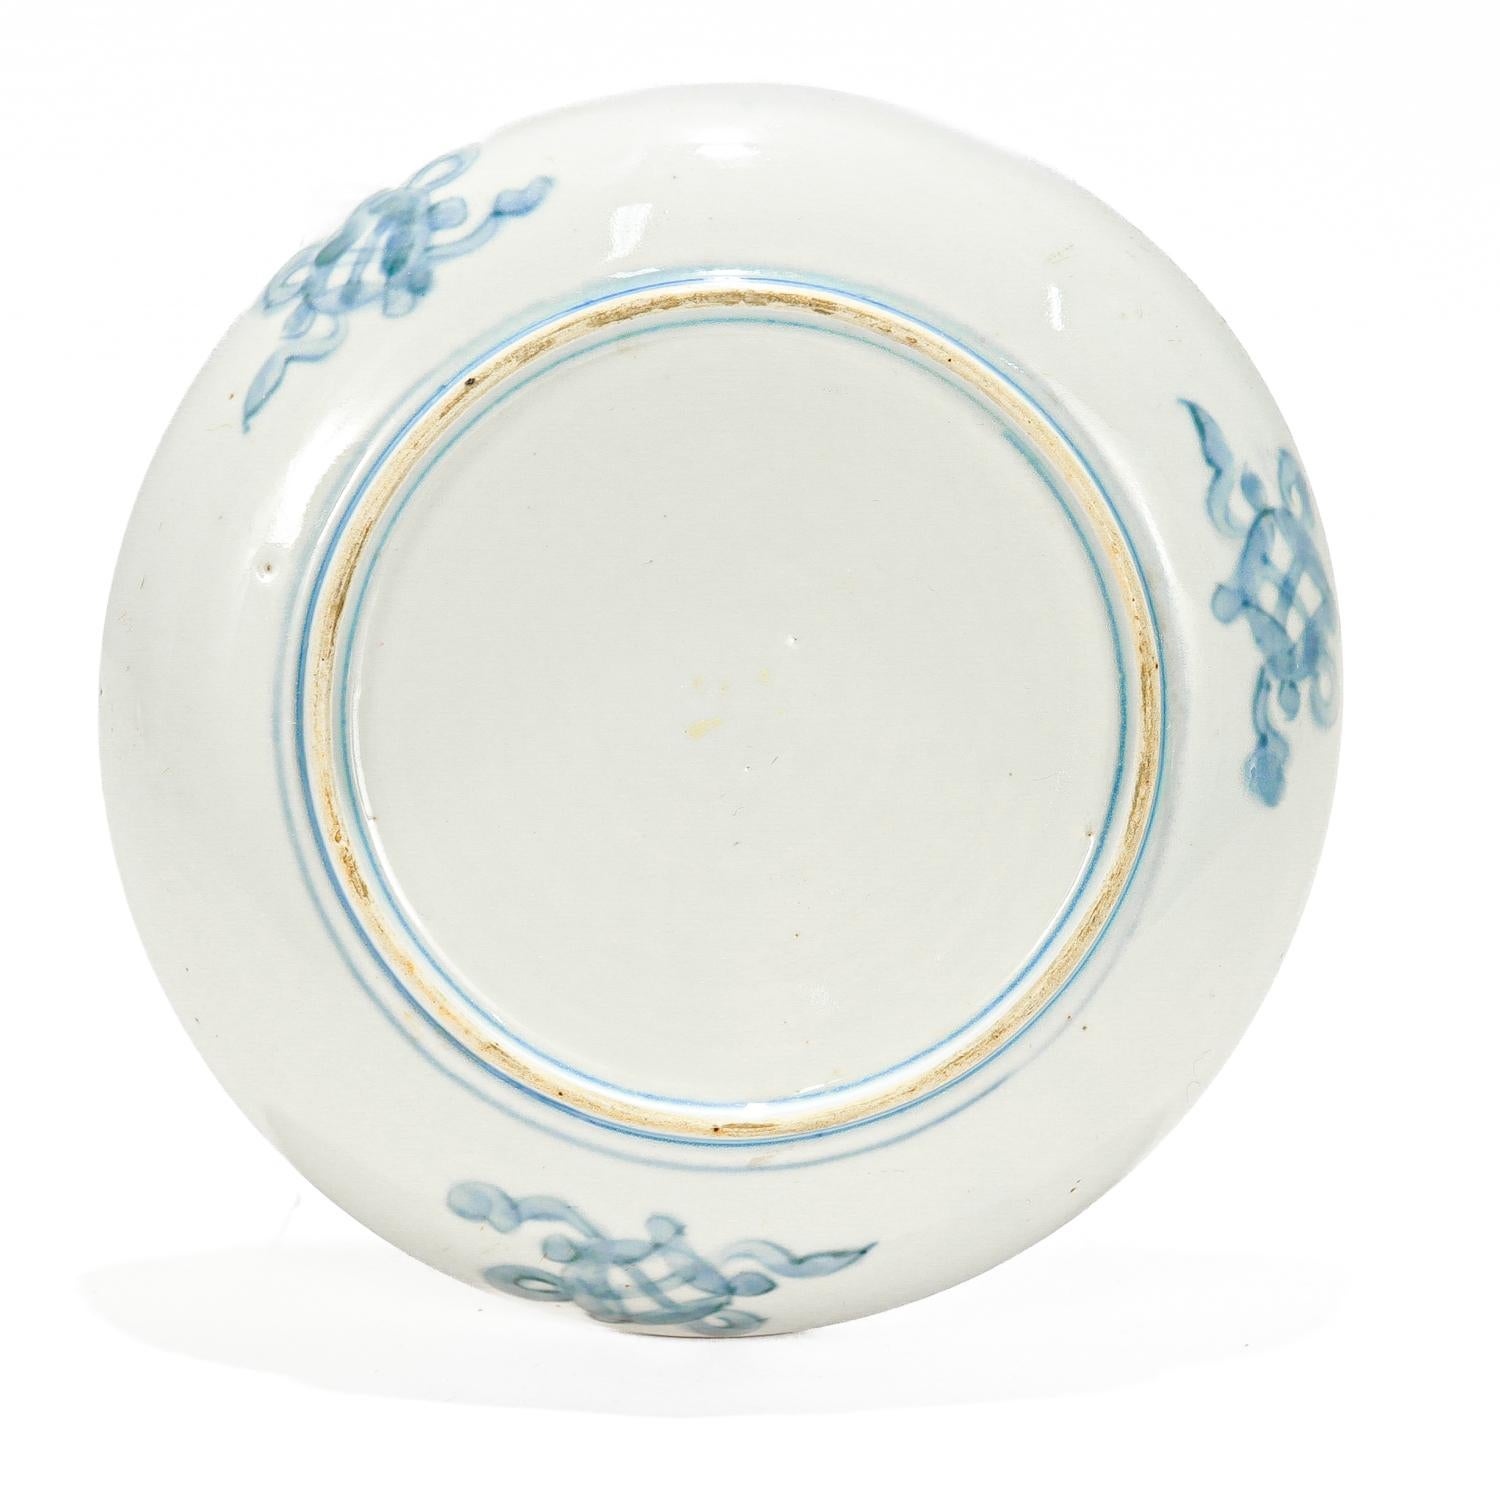 Antique Japanese Imari Porcelain Plate or Dish In Good Condition For Sale In Philadelphia, PA